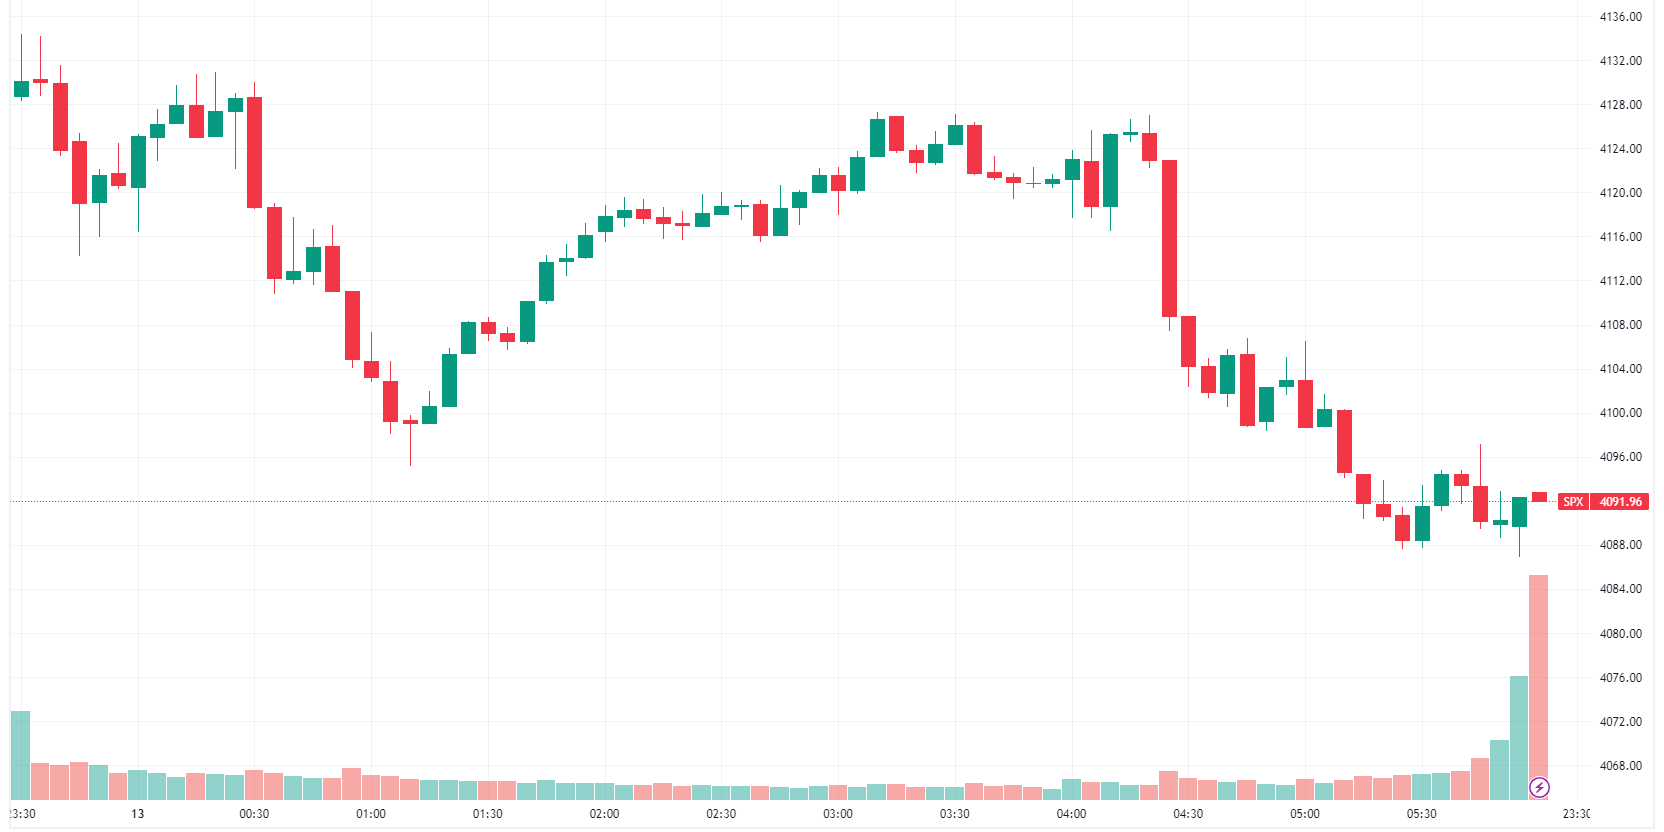 The S&P 500 gave up all its gains into the close, but the losses were surprisingly muted. (Source: TradingView)